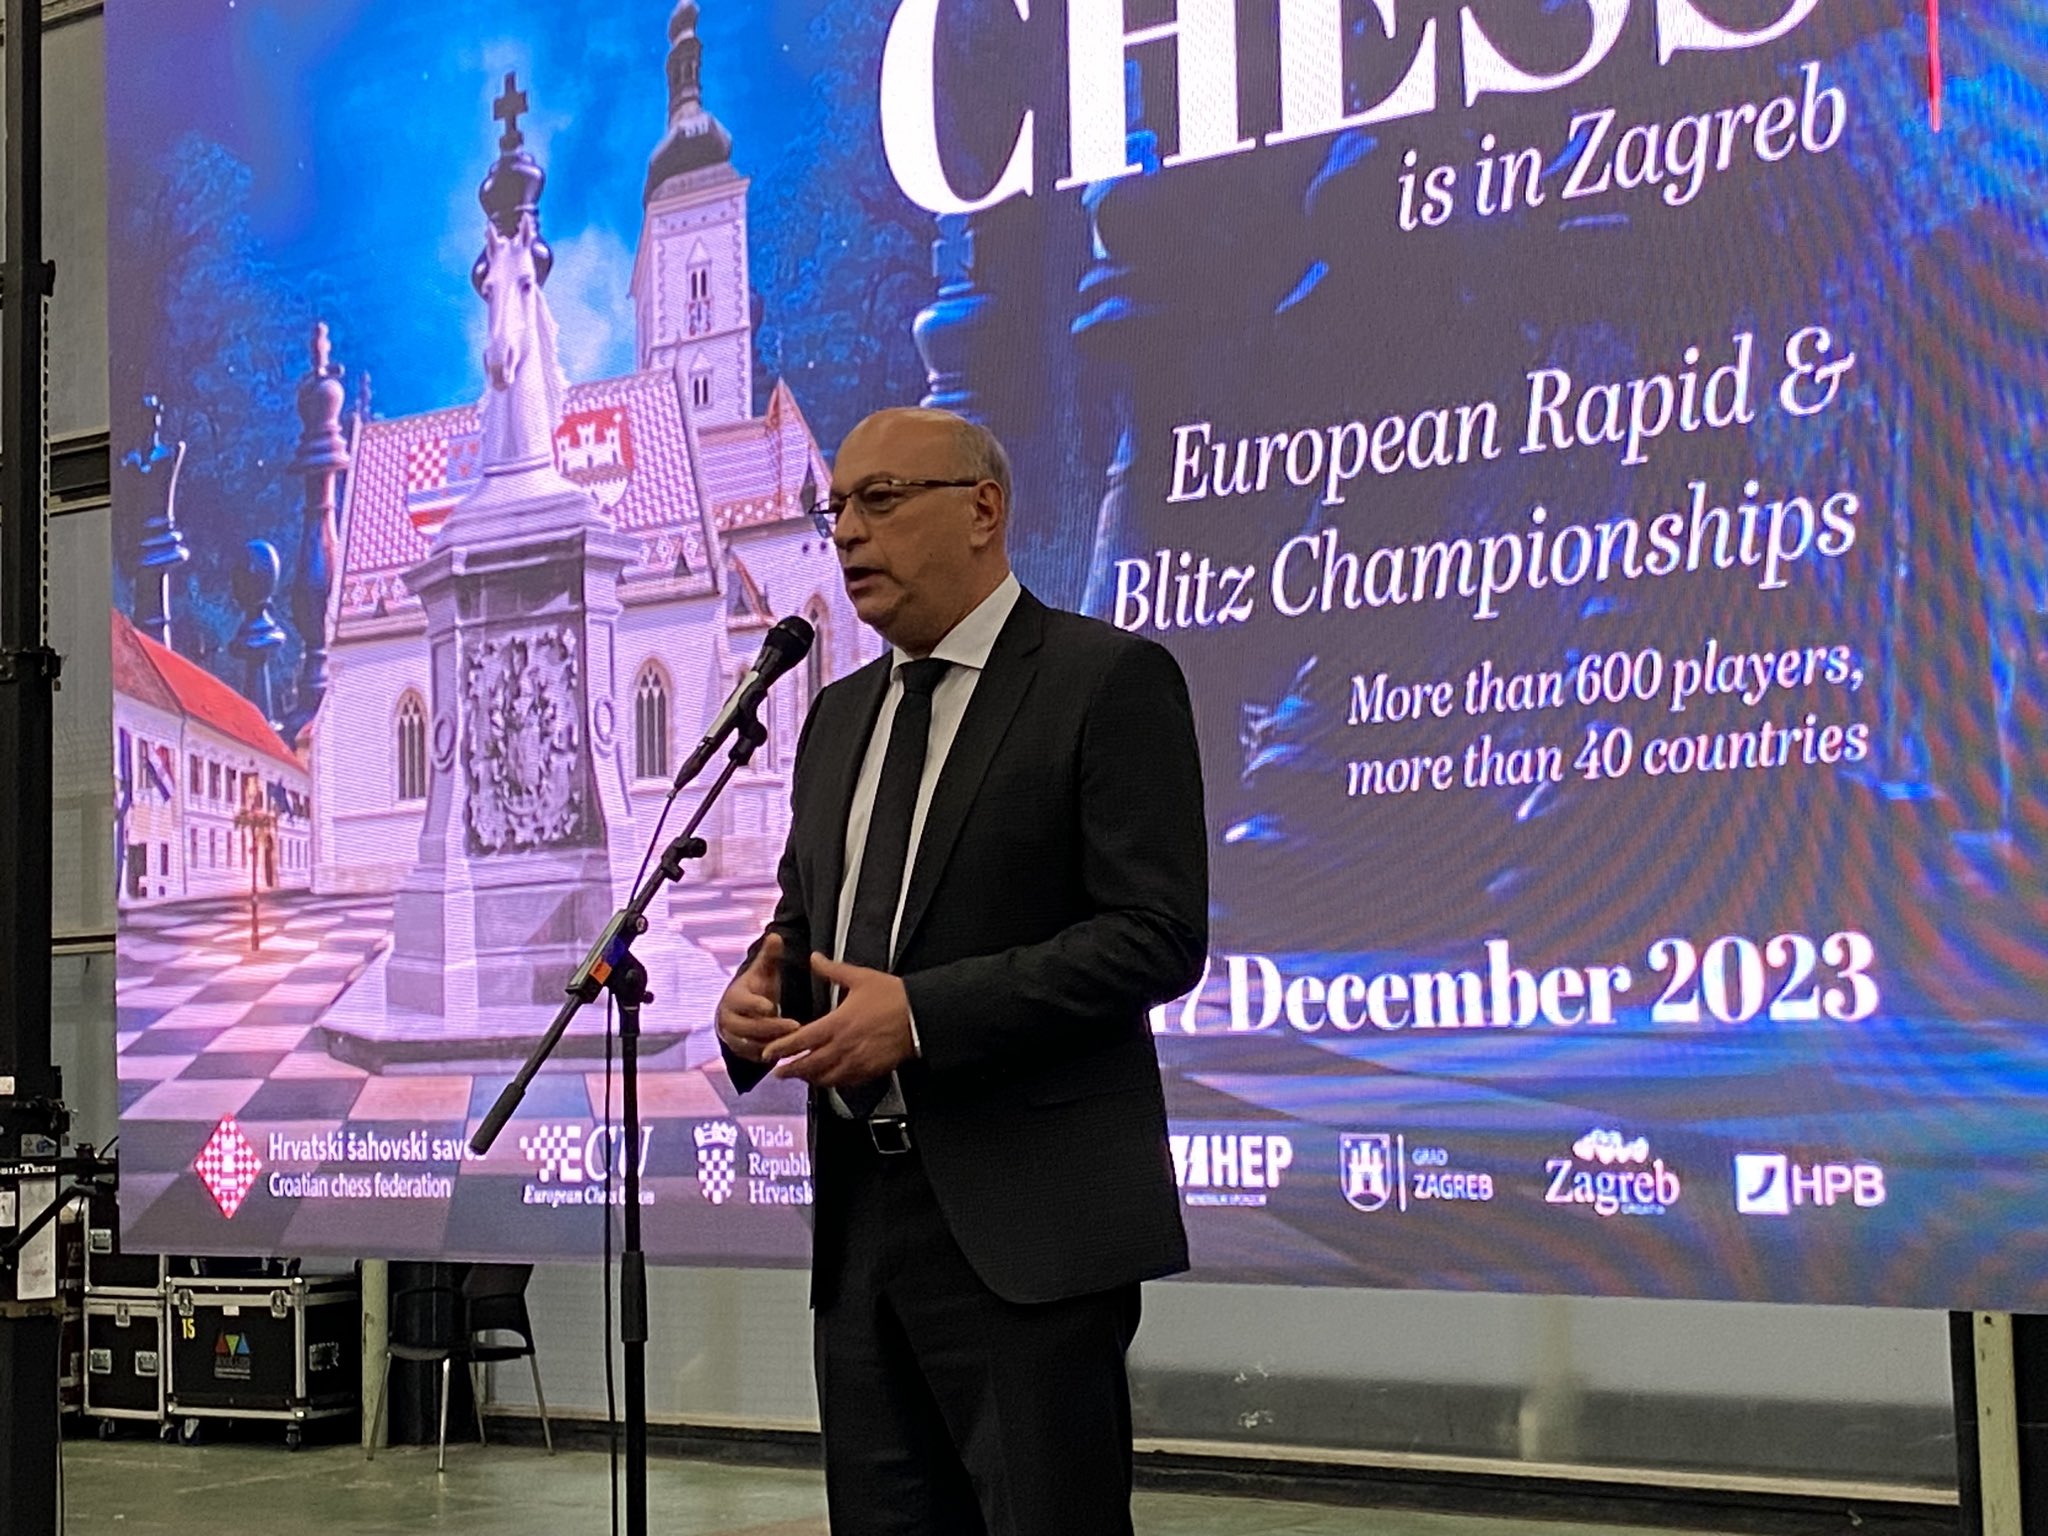 European Chess Union on X: After 8 hours of the R6 marathon at